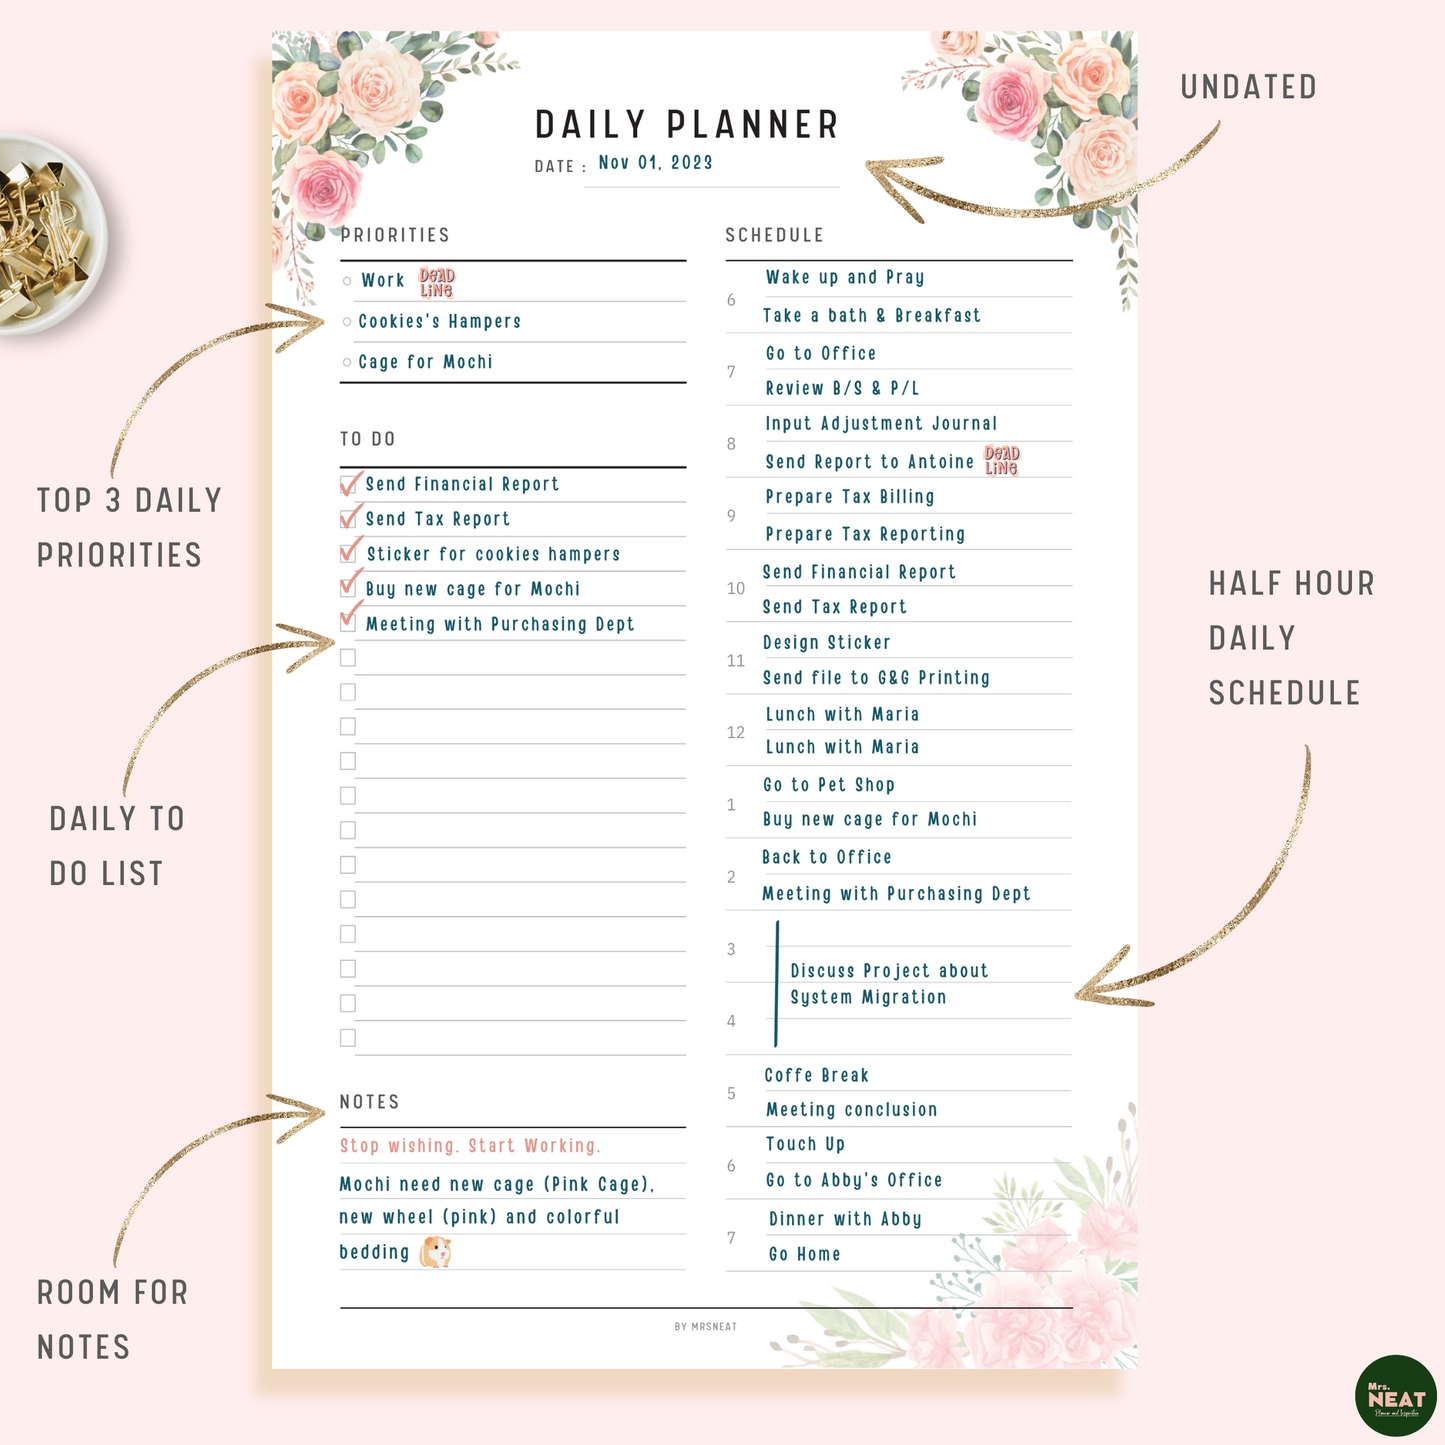 Floral Daily Planner with room for Daily Priorities, Half Hour Schedule, To Do and Notes